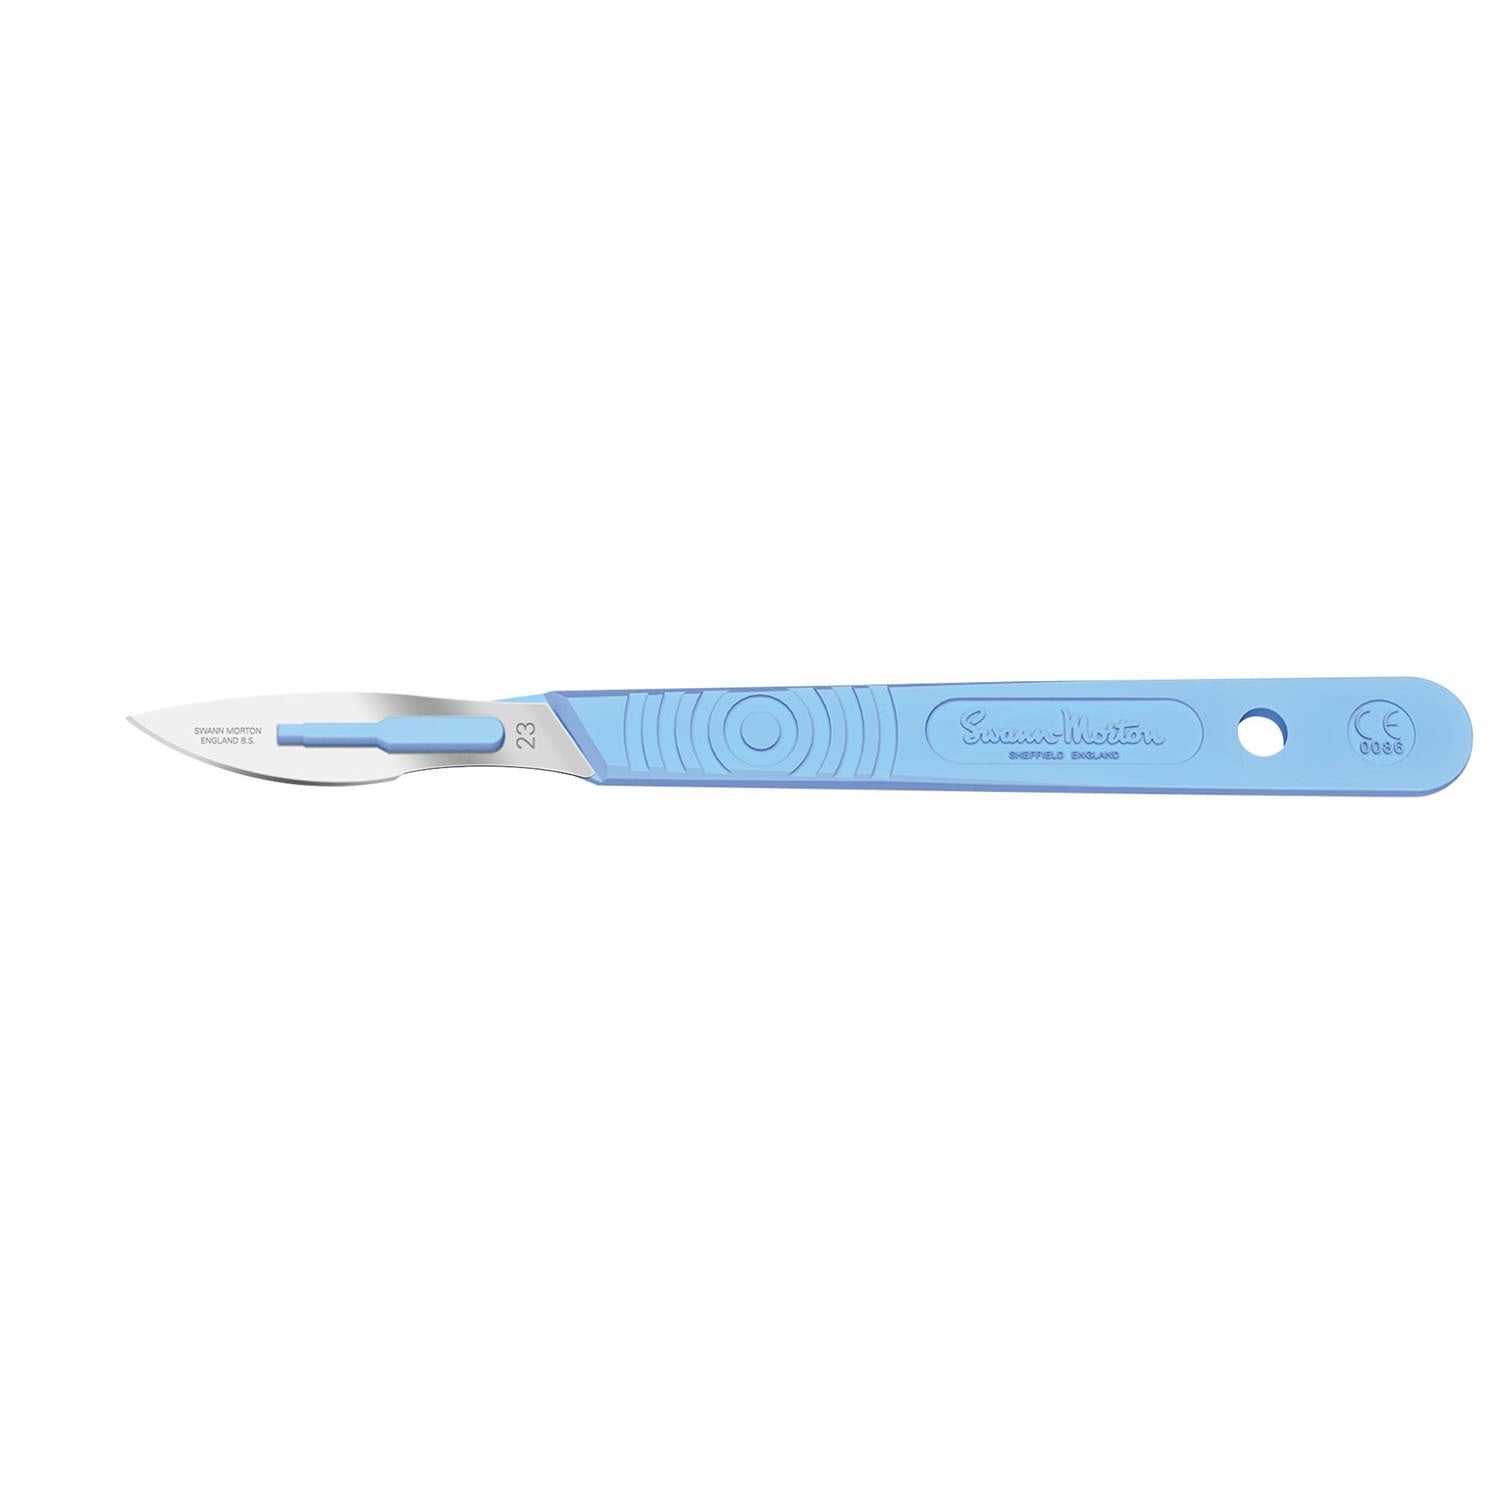 Swann Morton Sterile Scalpels | Disposable | No' 23 | Pack of 10